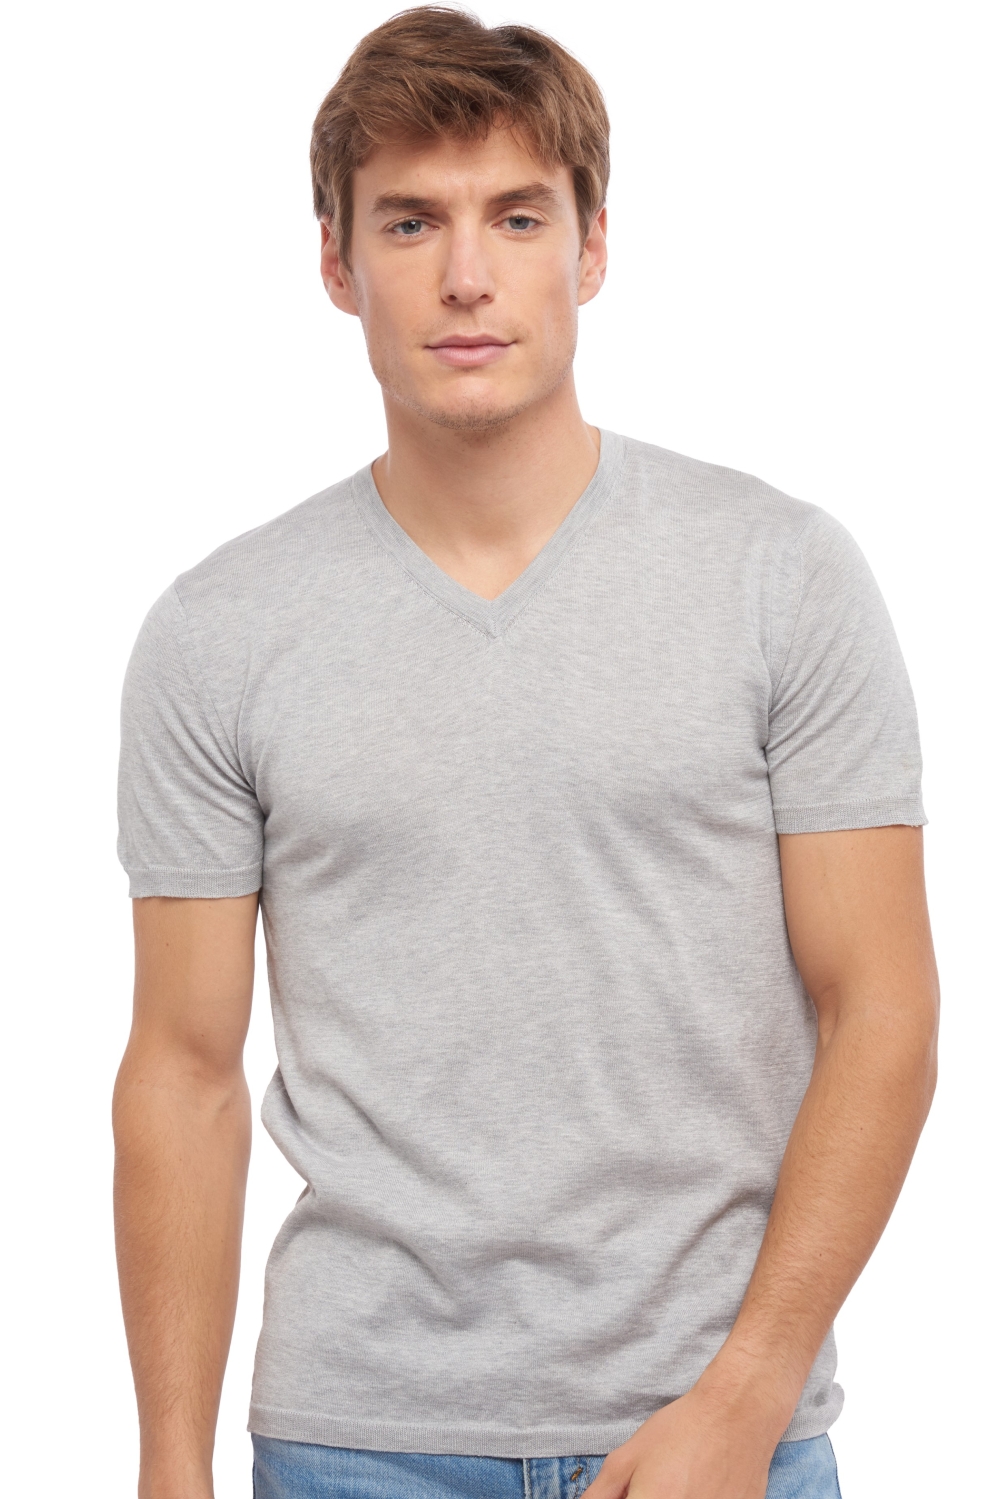 Coton Giza 45 pull homme michael flanelle 4xl